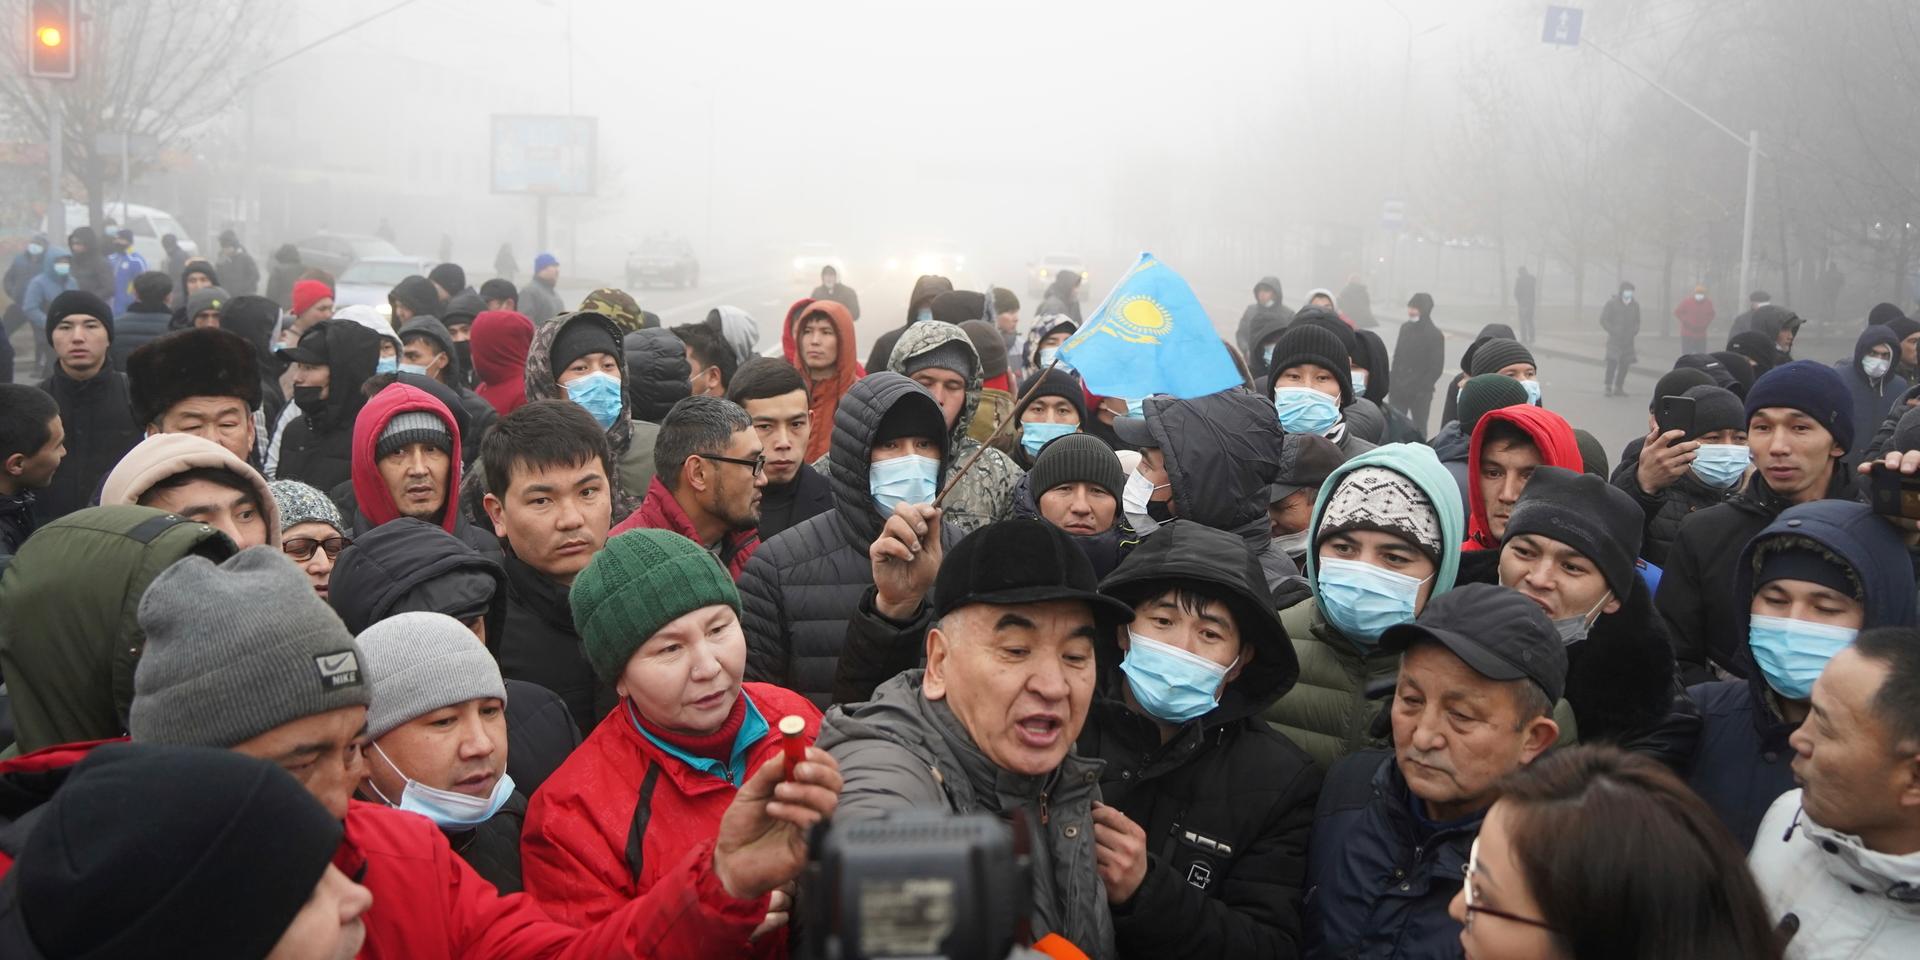  Demonstrators, one of which holds a police ammunition, gather during a protest in Almaty, Kazakhstan, Wednesday, Jan. 5, 2022. Demonstrators denouncing the doubling of prices for liquefied gas have clashed with police in Kazakhstan's largest city and held protests in about a dozen other cities in the country. (AP Photo/Vladimir Tretyakov)  XAZ123